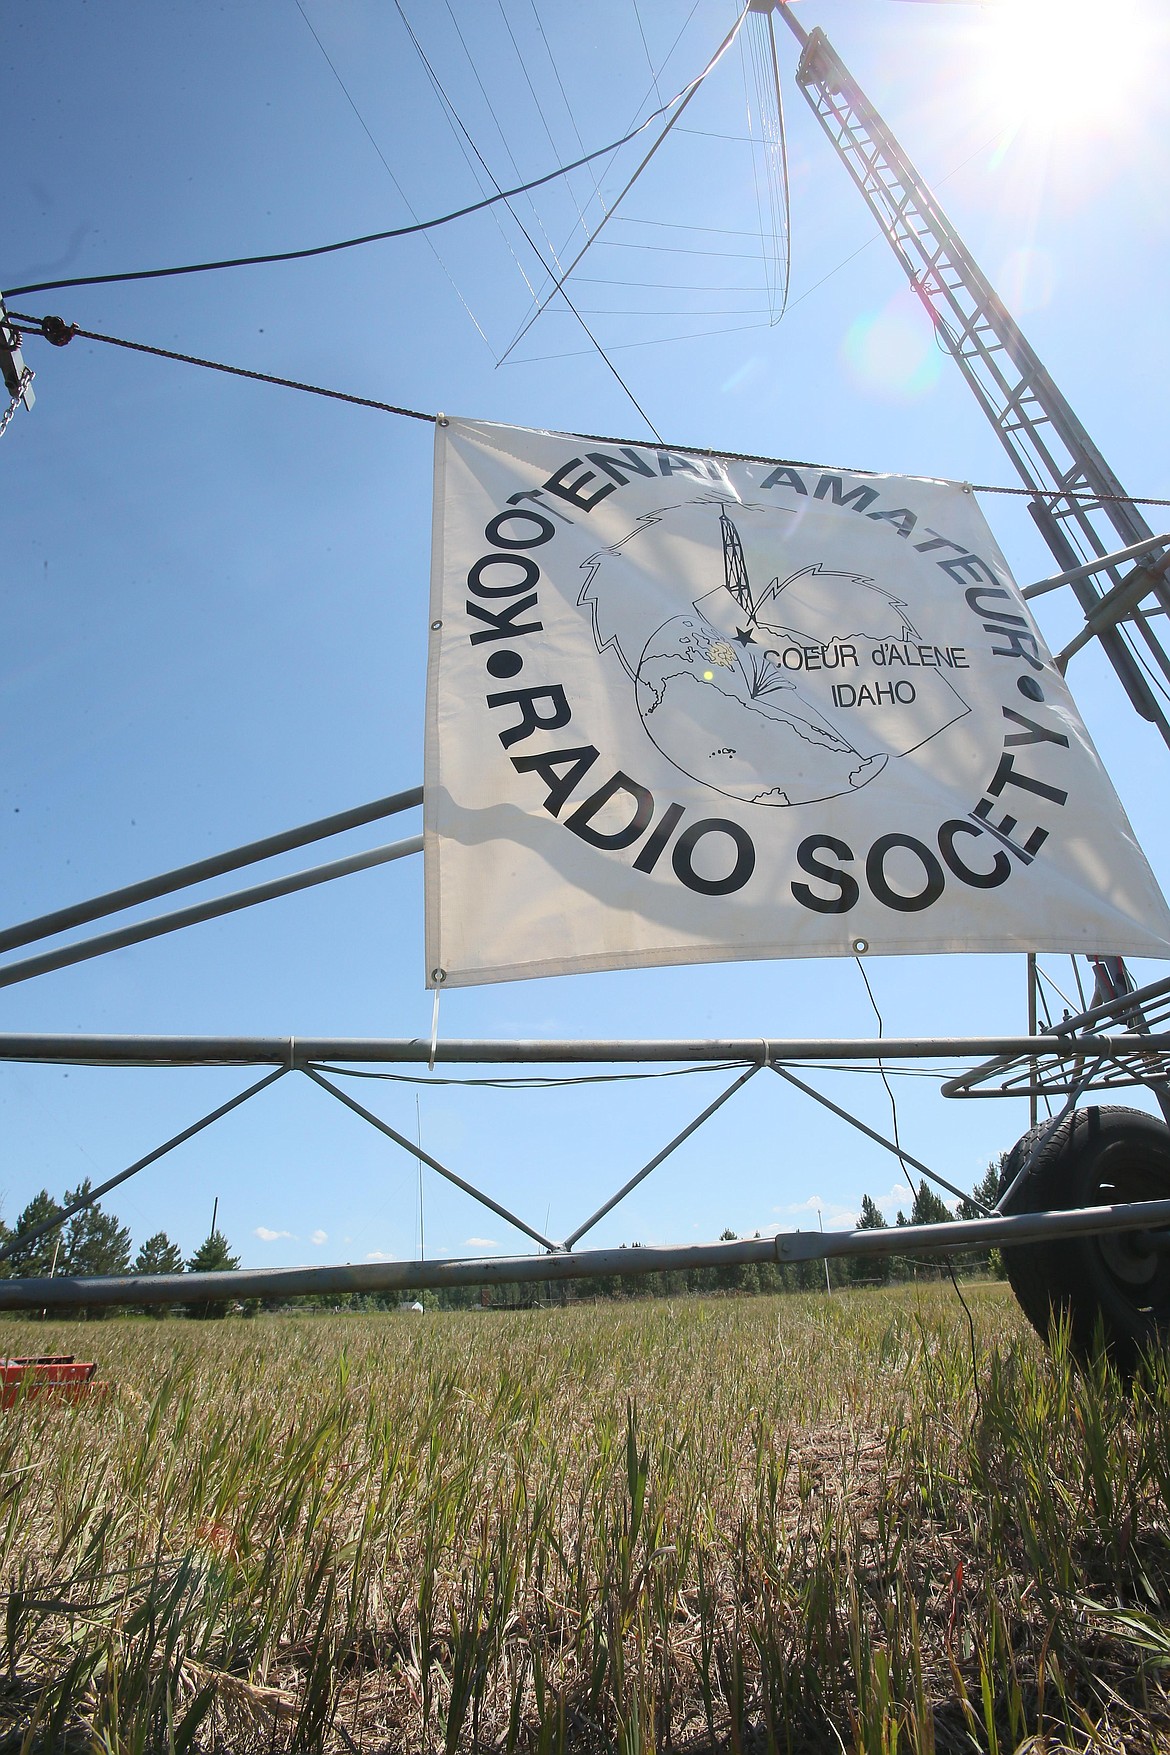 A Kootenai Amateur Radio Society banner hangs beneath a massive antenna Friday morning on Frank Krug's Post Falls property. Society members are participating in an Amateur Radio Field Day exercise today and Sunday.